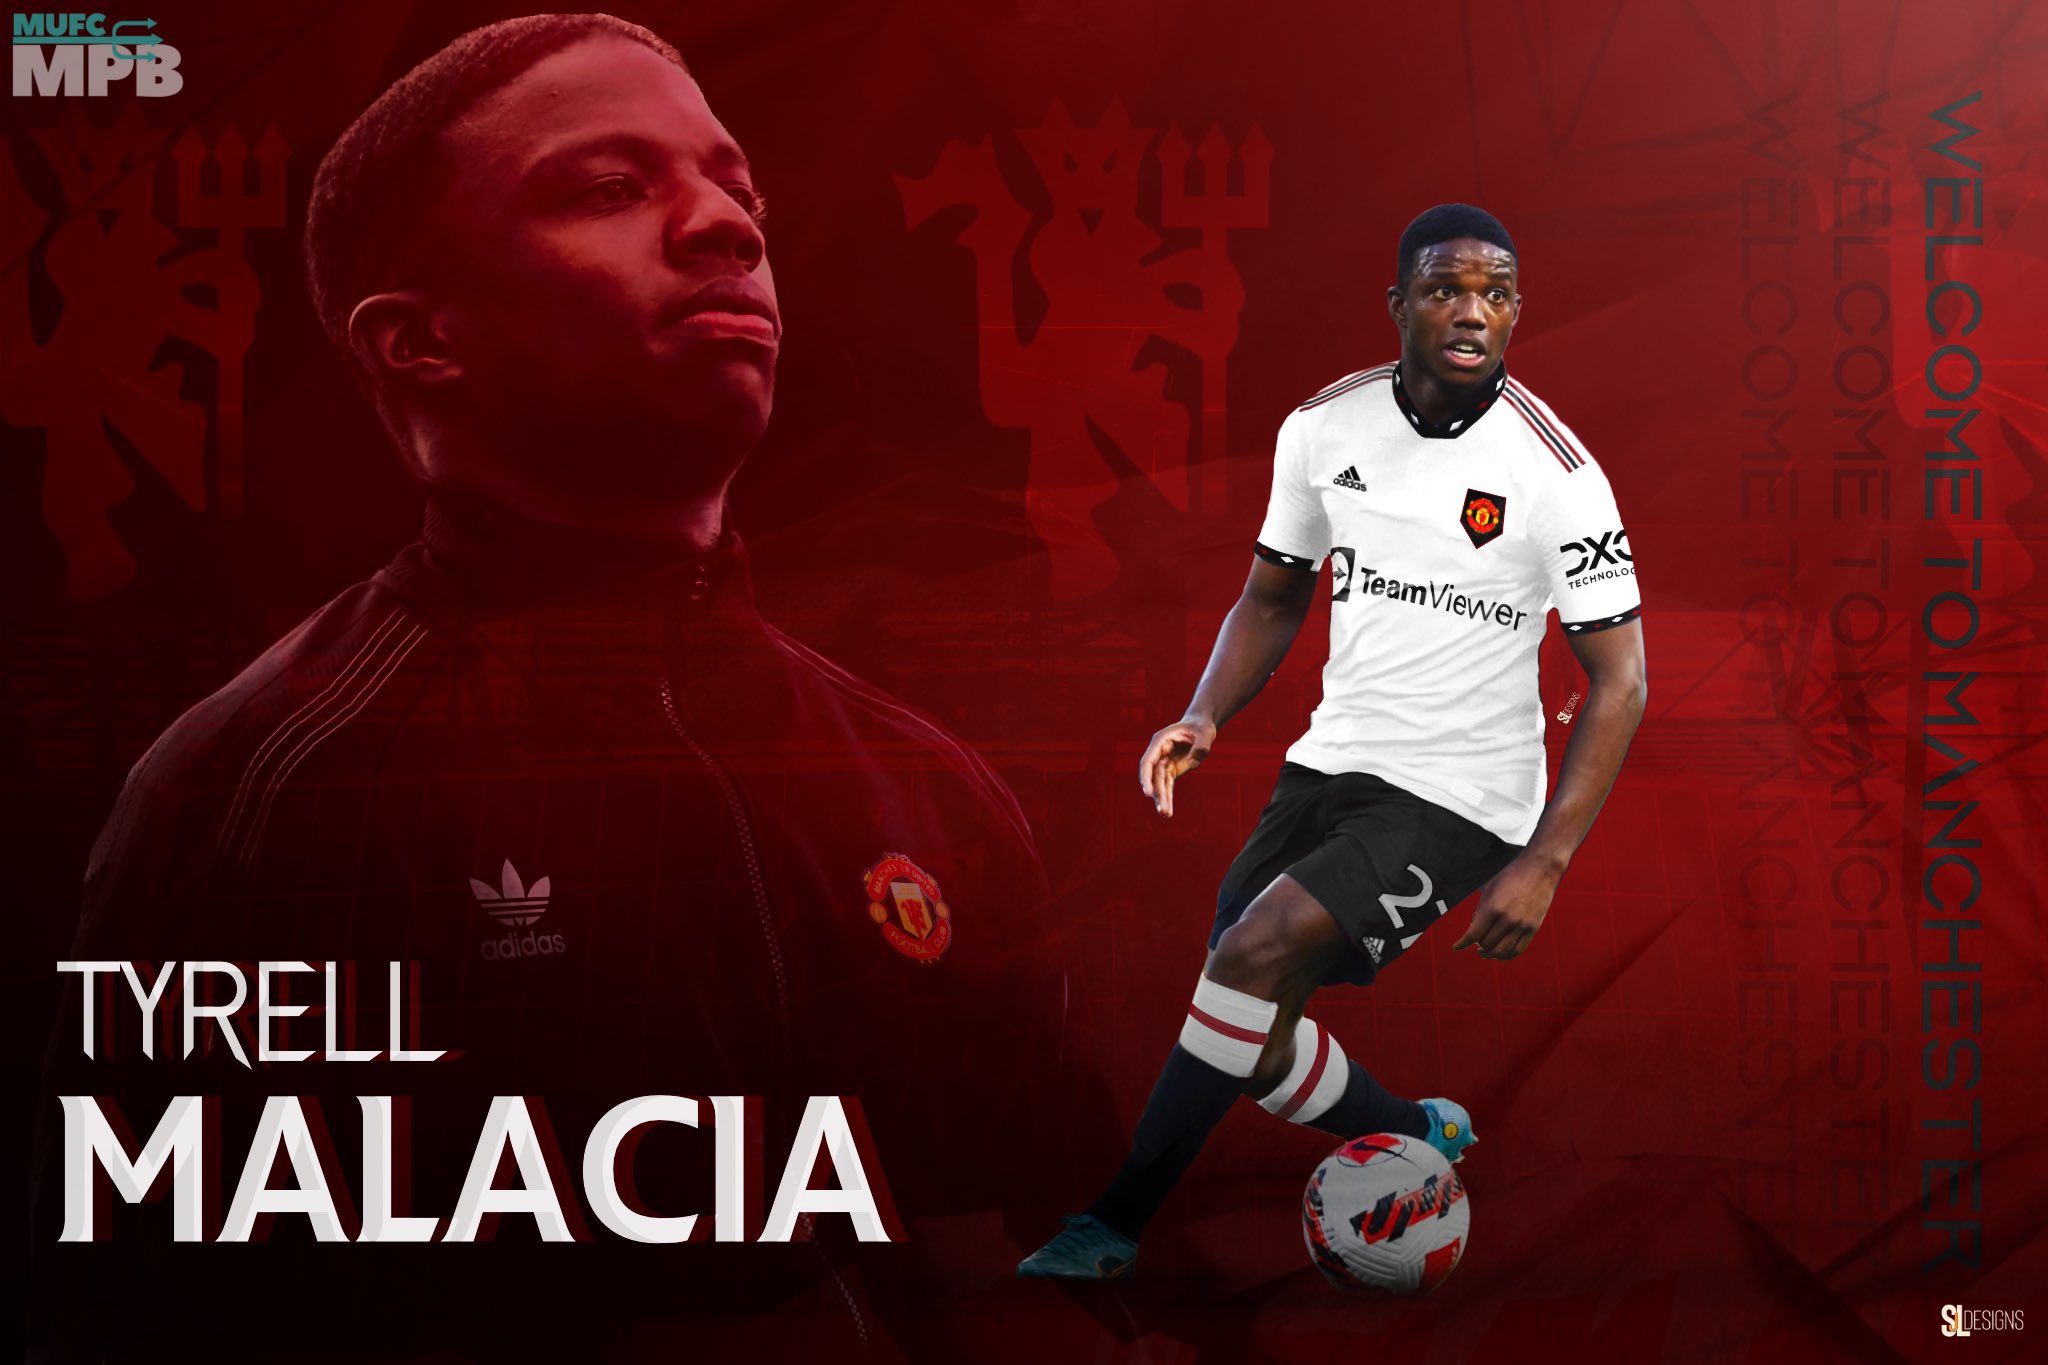 mufcmpb to Manchester United, Tyrell Malacia! Great signing for just £13m